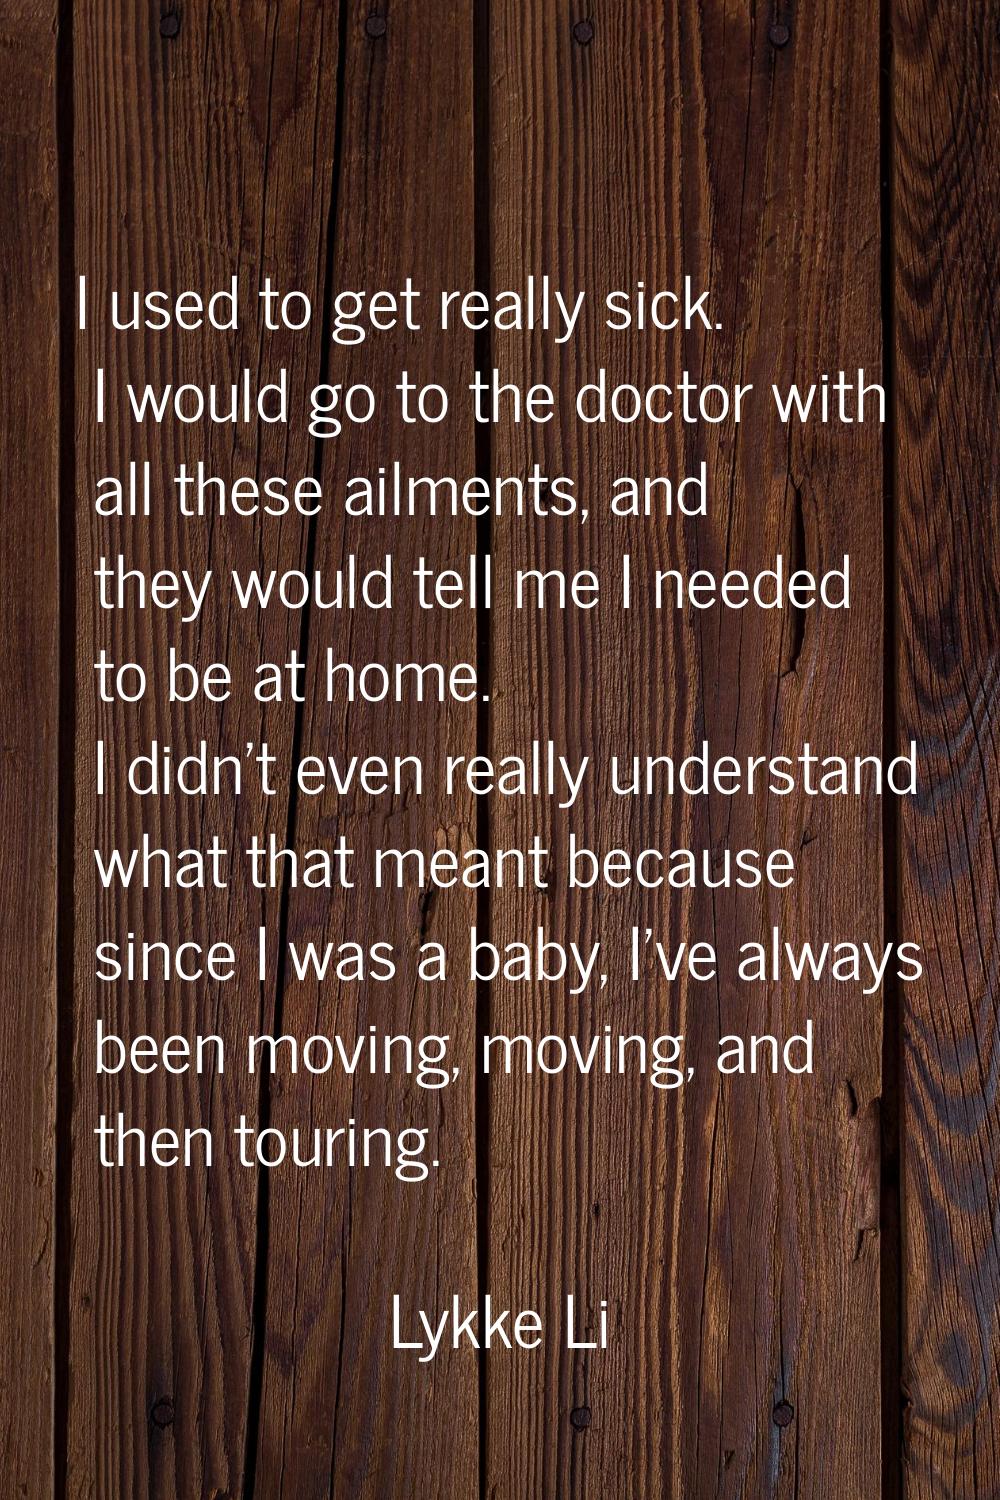 I used to get really sick. I would go to the doctor with all these ailments, and they would tell me